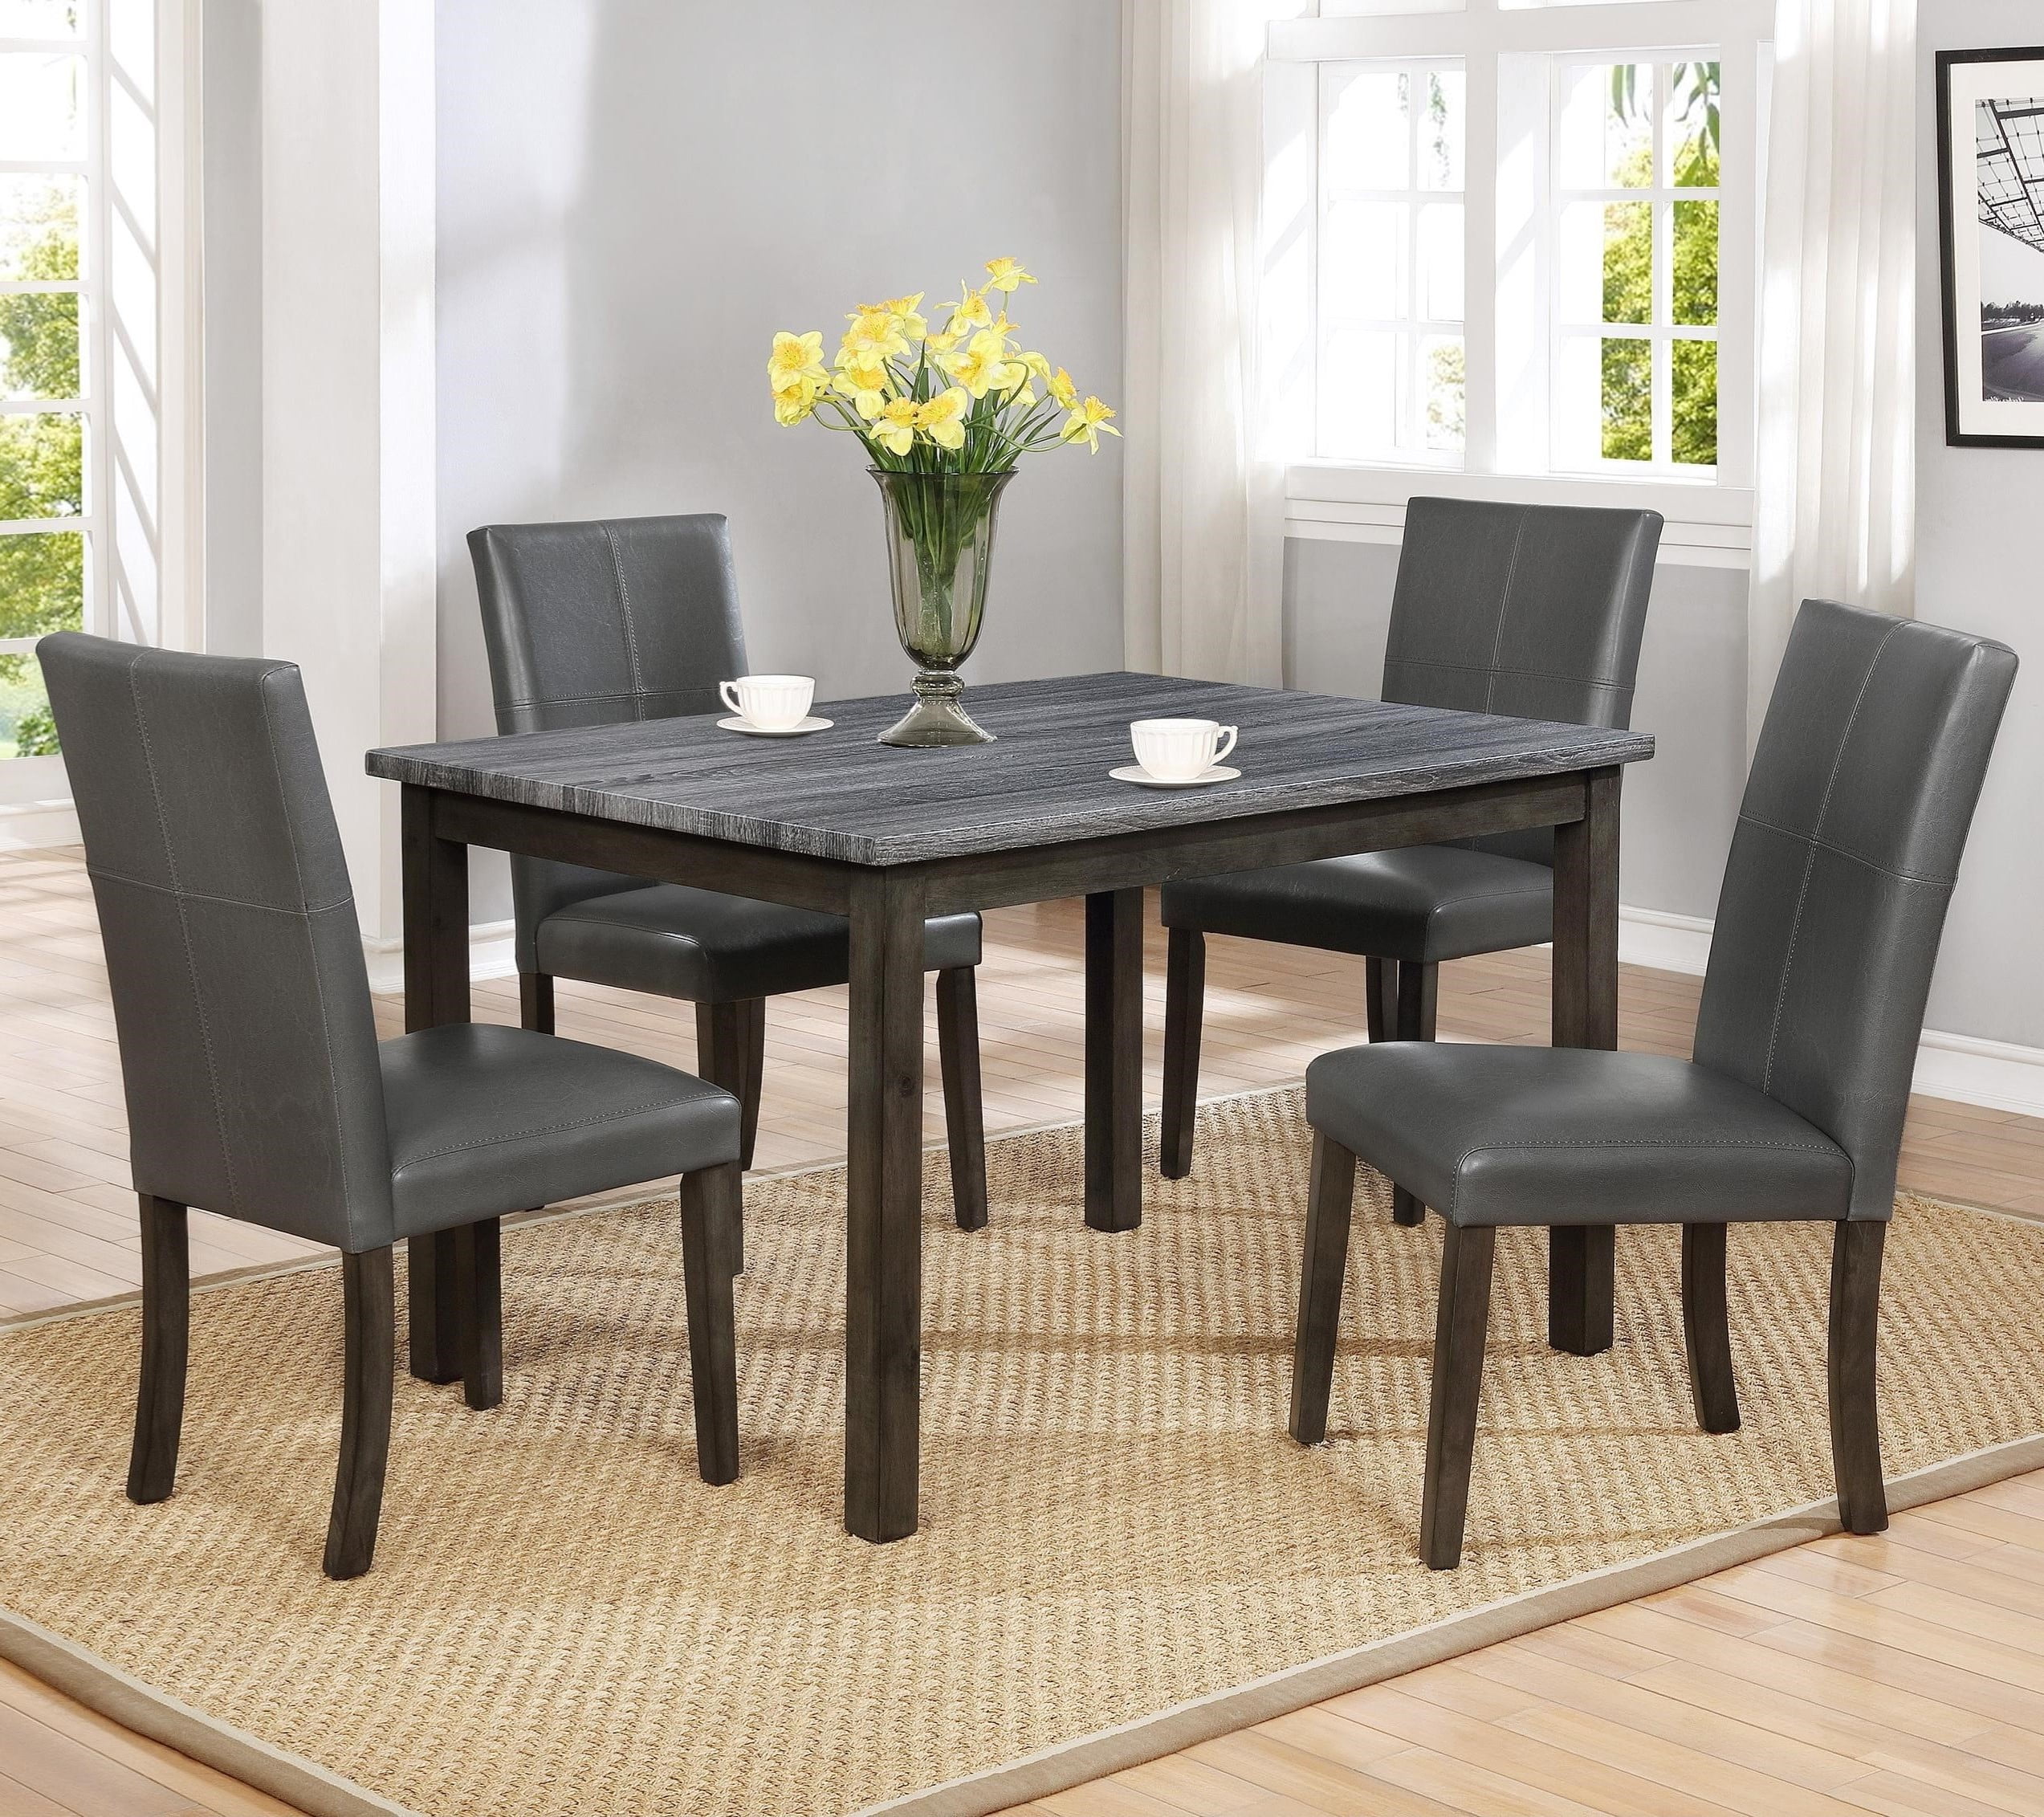 5pc Contemporary Style Dining Room Marble Top Set Table ...
